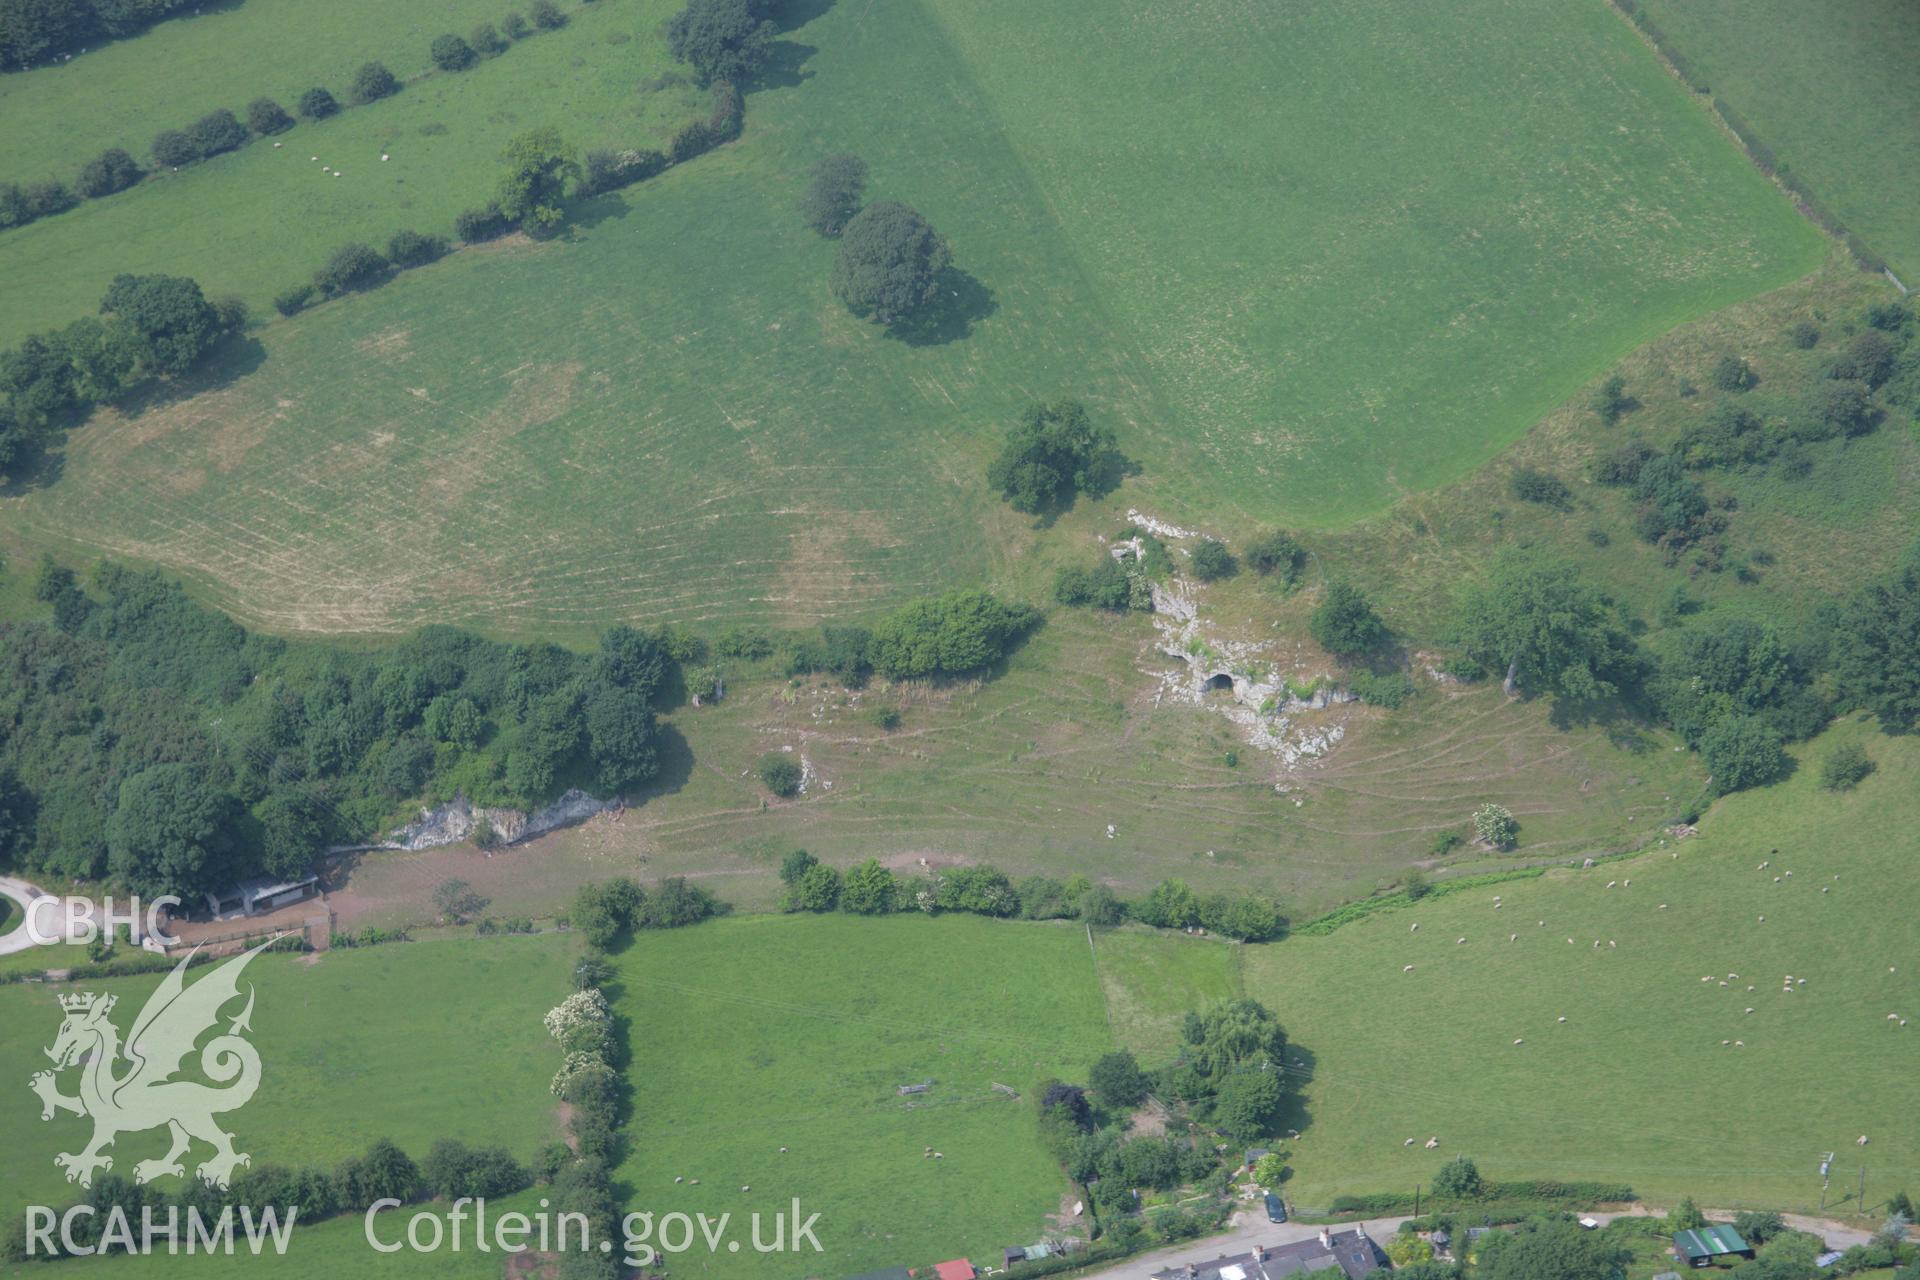 RCAHMW colour oblique aerial photograph of Ffynnon Beuno Cave. Taken on 04 July 2006 by Toby Driver.